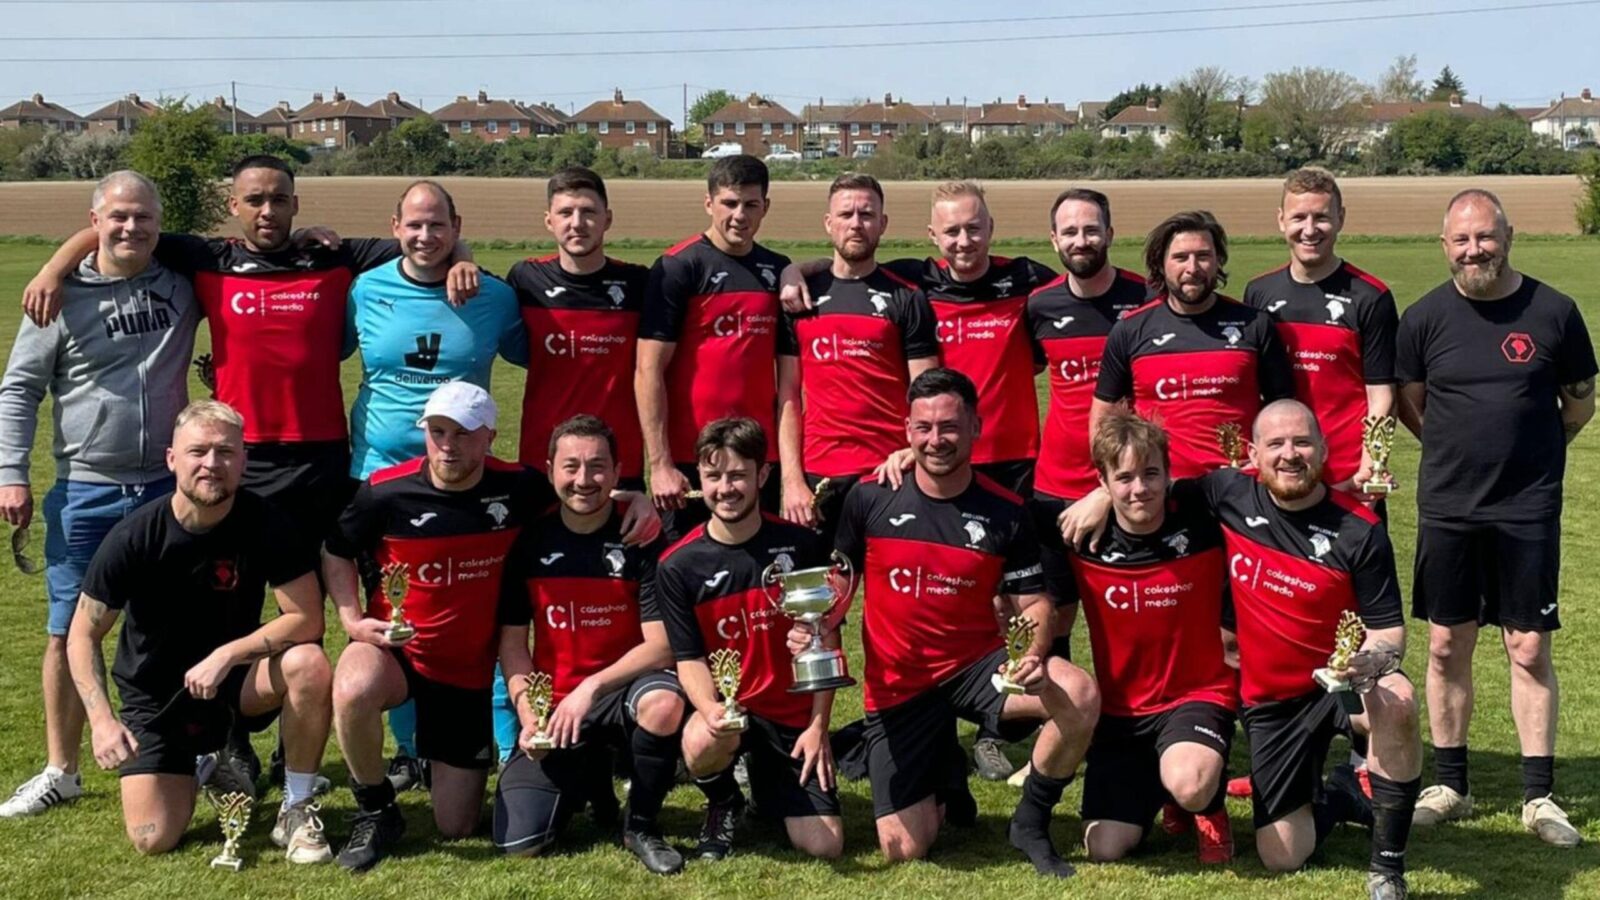 Cakeshop Media sponsored Red Lion win Tom Donnelly Cup - Dover Men's Sunday League